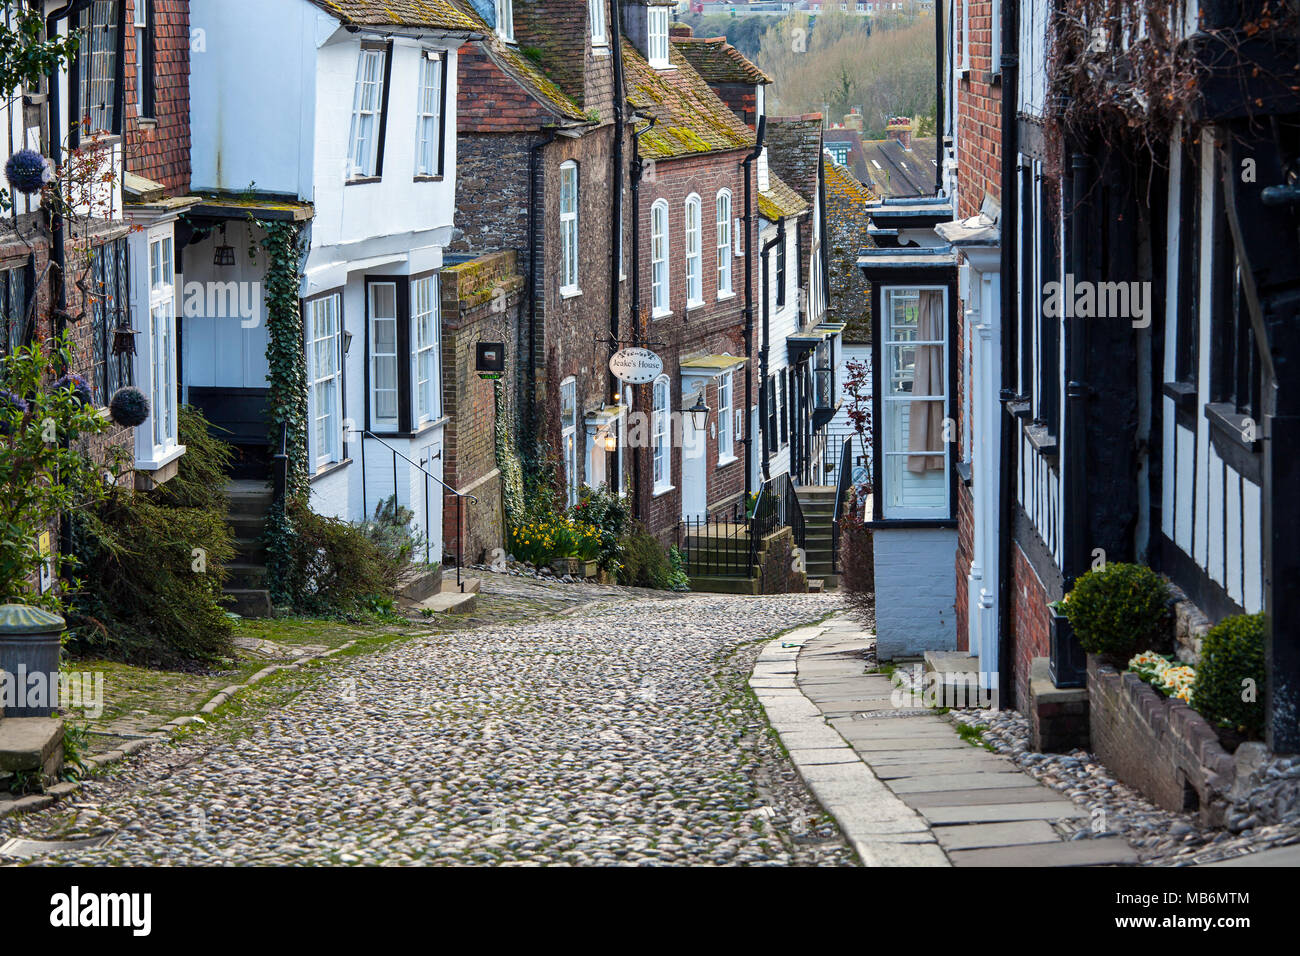 RYE, UK - APRIL 5th, 2018: Mermaid Street in  Rye is an old cobbled street which used to be the ancient town's main road. This famous street is lined  Stock Photo